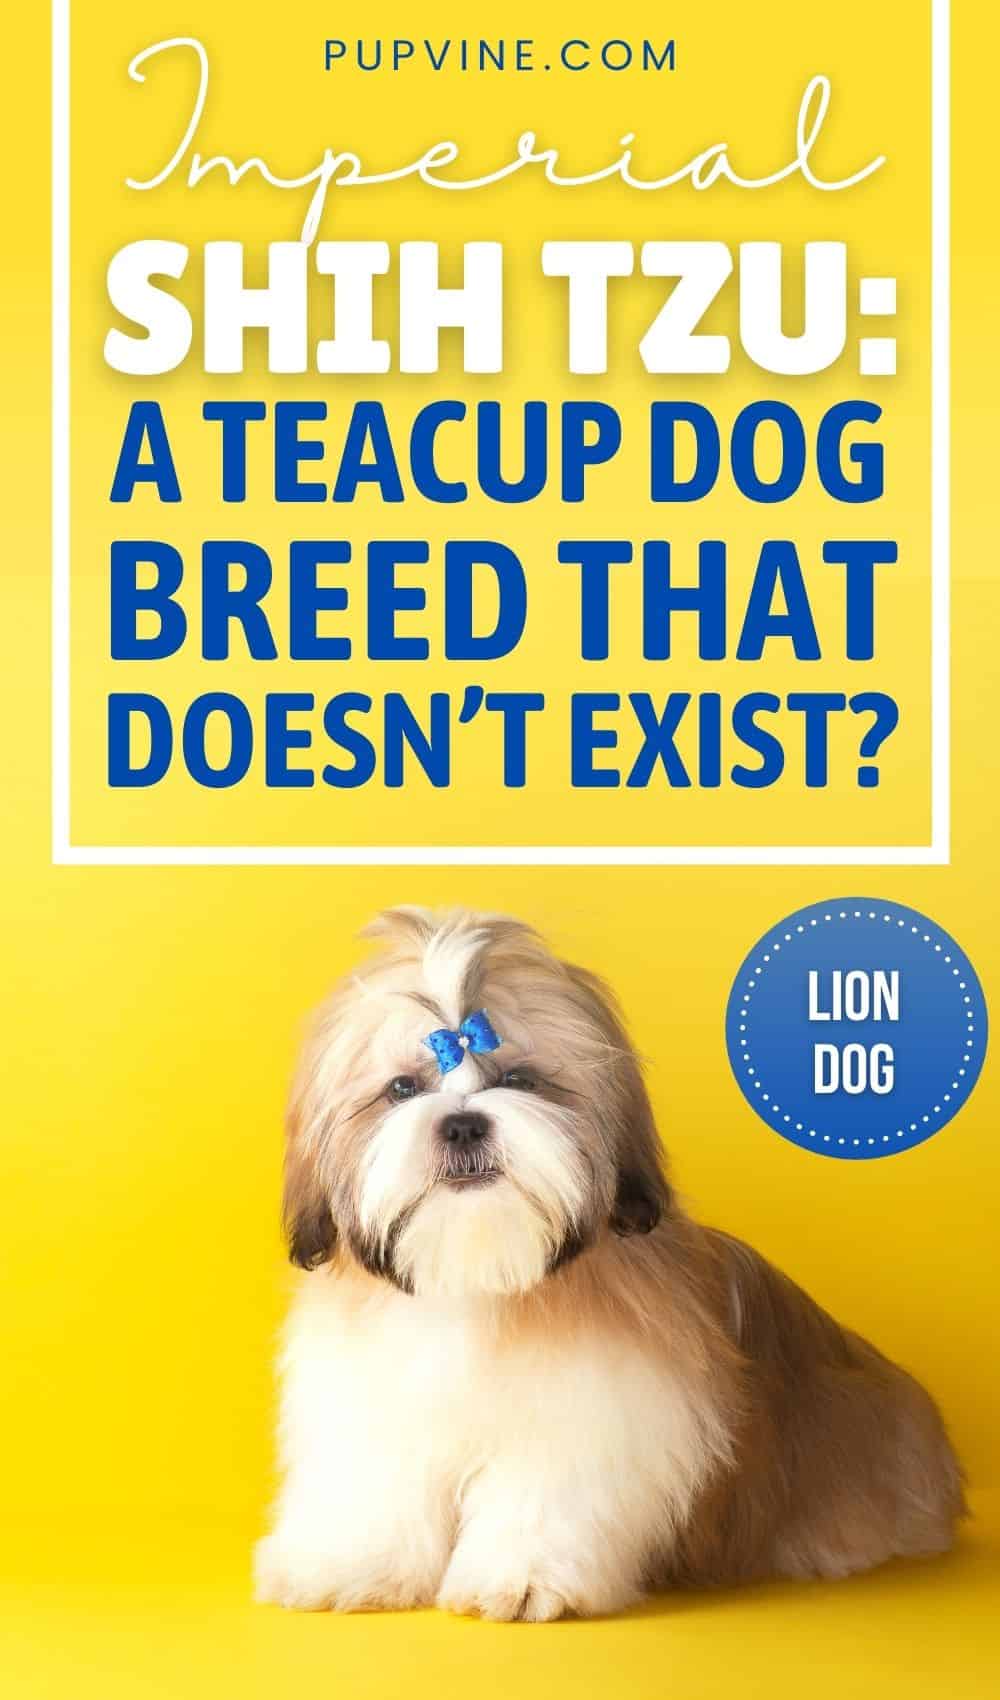 Imperial Shih Tzu: A Teacup Dog Breed That Doesn't Exist?